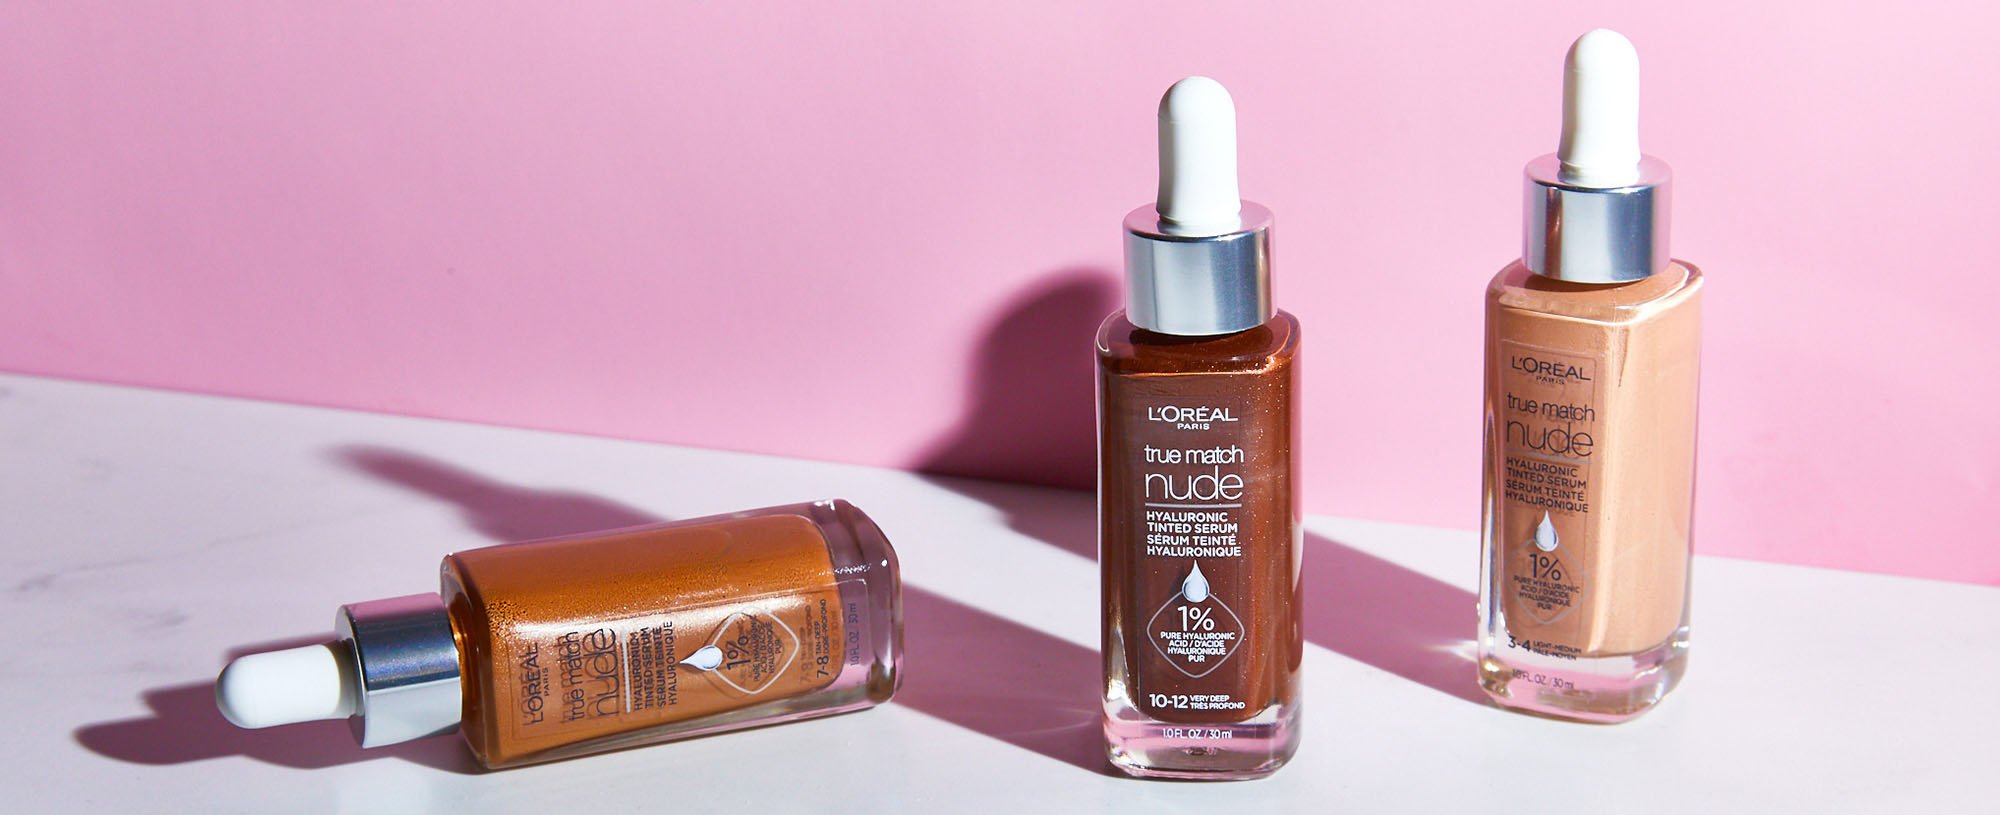 How To Use A Tinted Serum For Back To Work This Fall - L'Oréal Paris